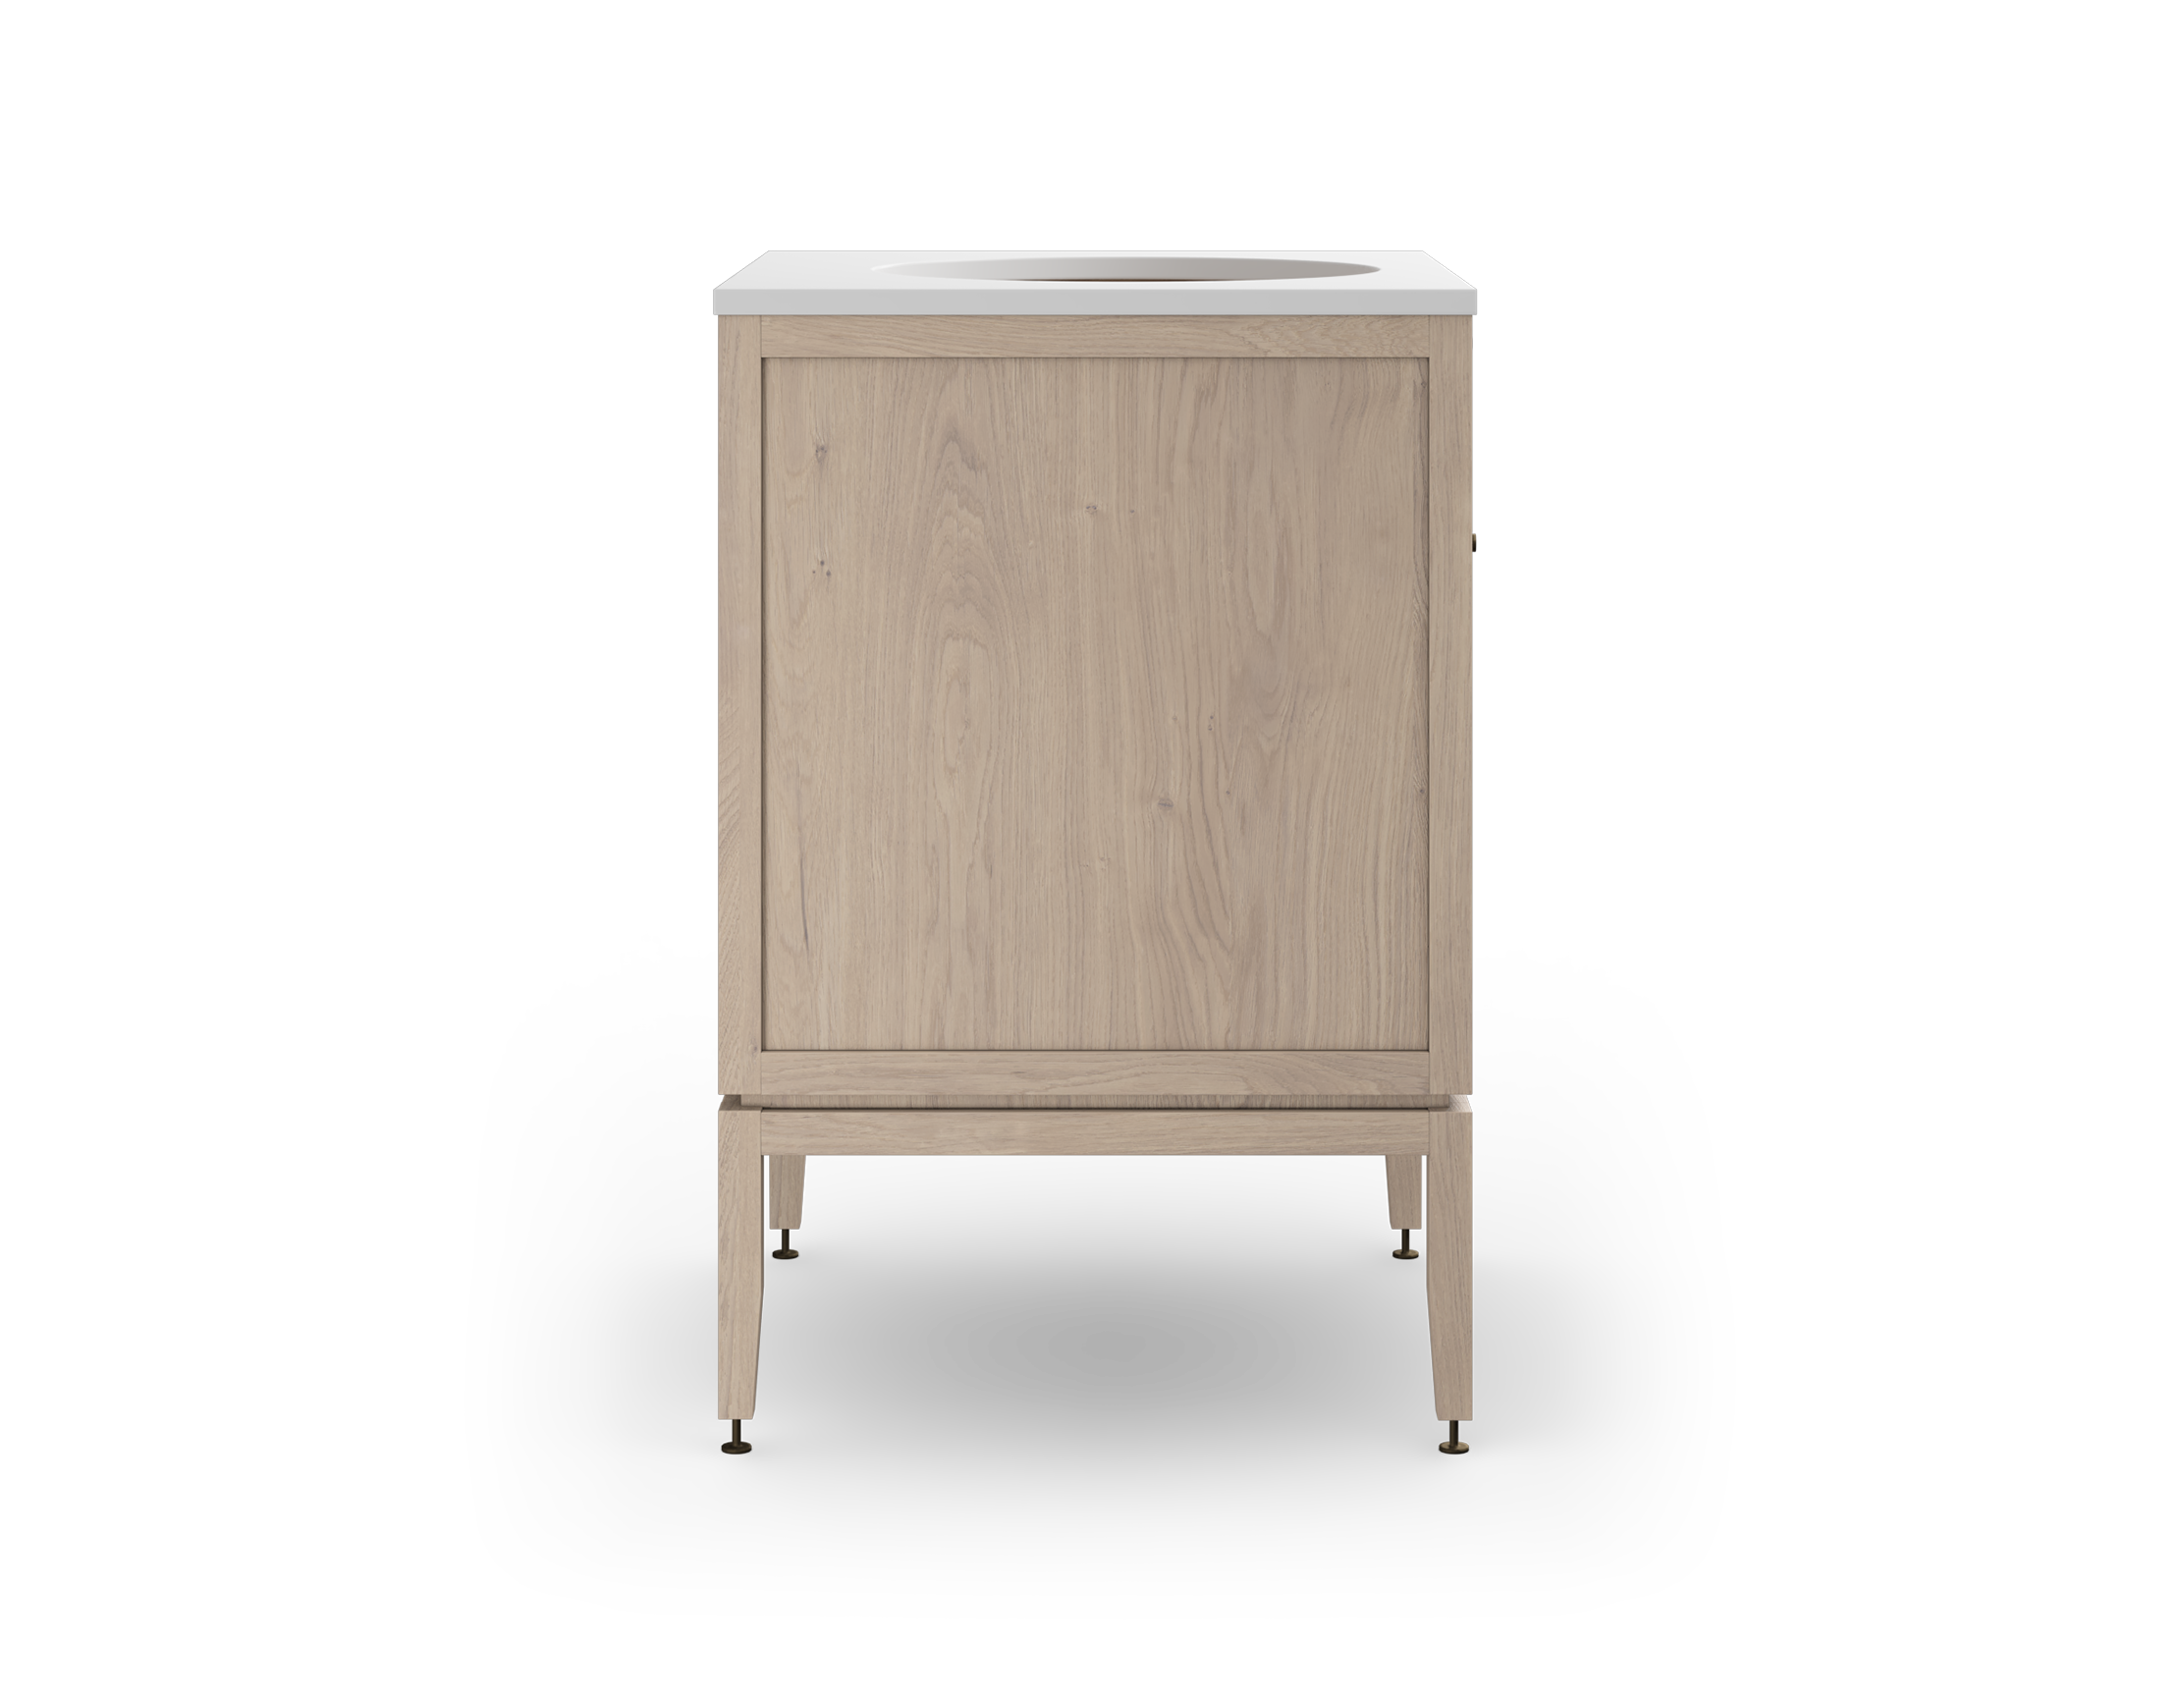 Coquo modular bathroom vanity with fix front and two doors in white stained oak.